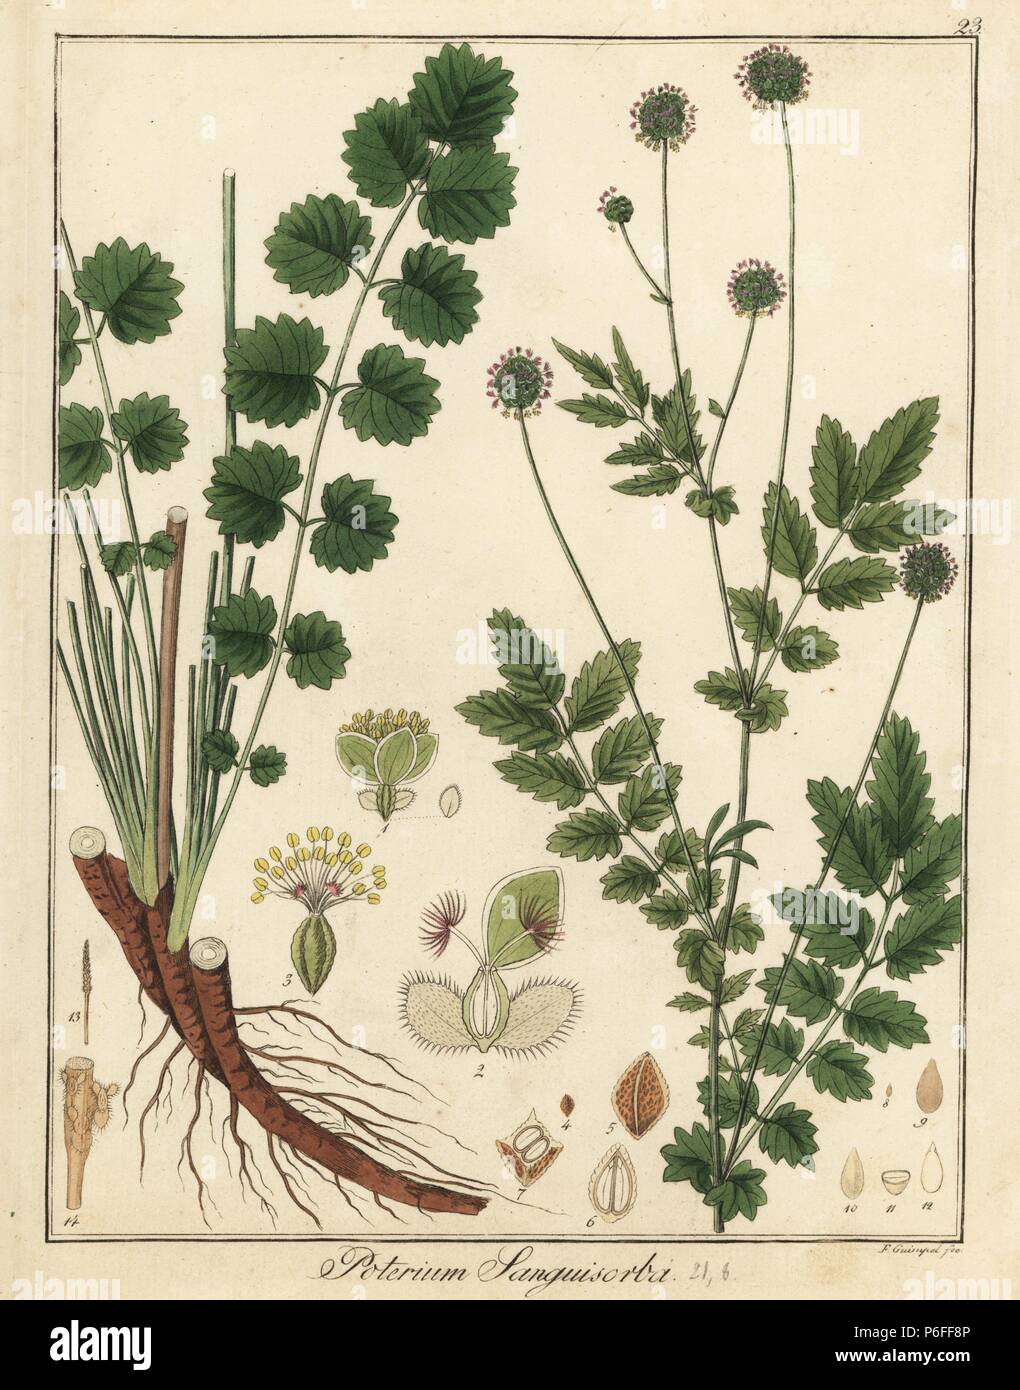 Salad or small burnet, Poterium sanguisorba. Handcoloured copperplate engraving by F. Guimpel from Dr. Friedrich Gottlob Hayne's Medical Botany, Berlin, 1822. Hayne (1763-1832) was a German botanist, apothecary and professor of pharmaceutical botany at Berlin University. Stock Photo